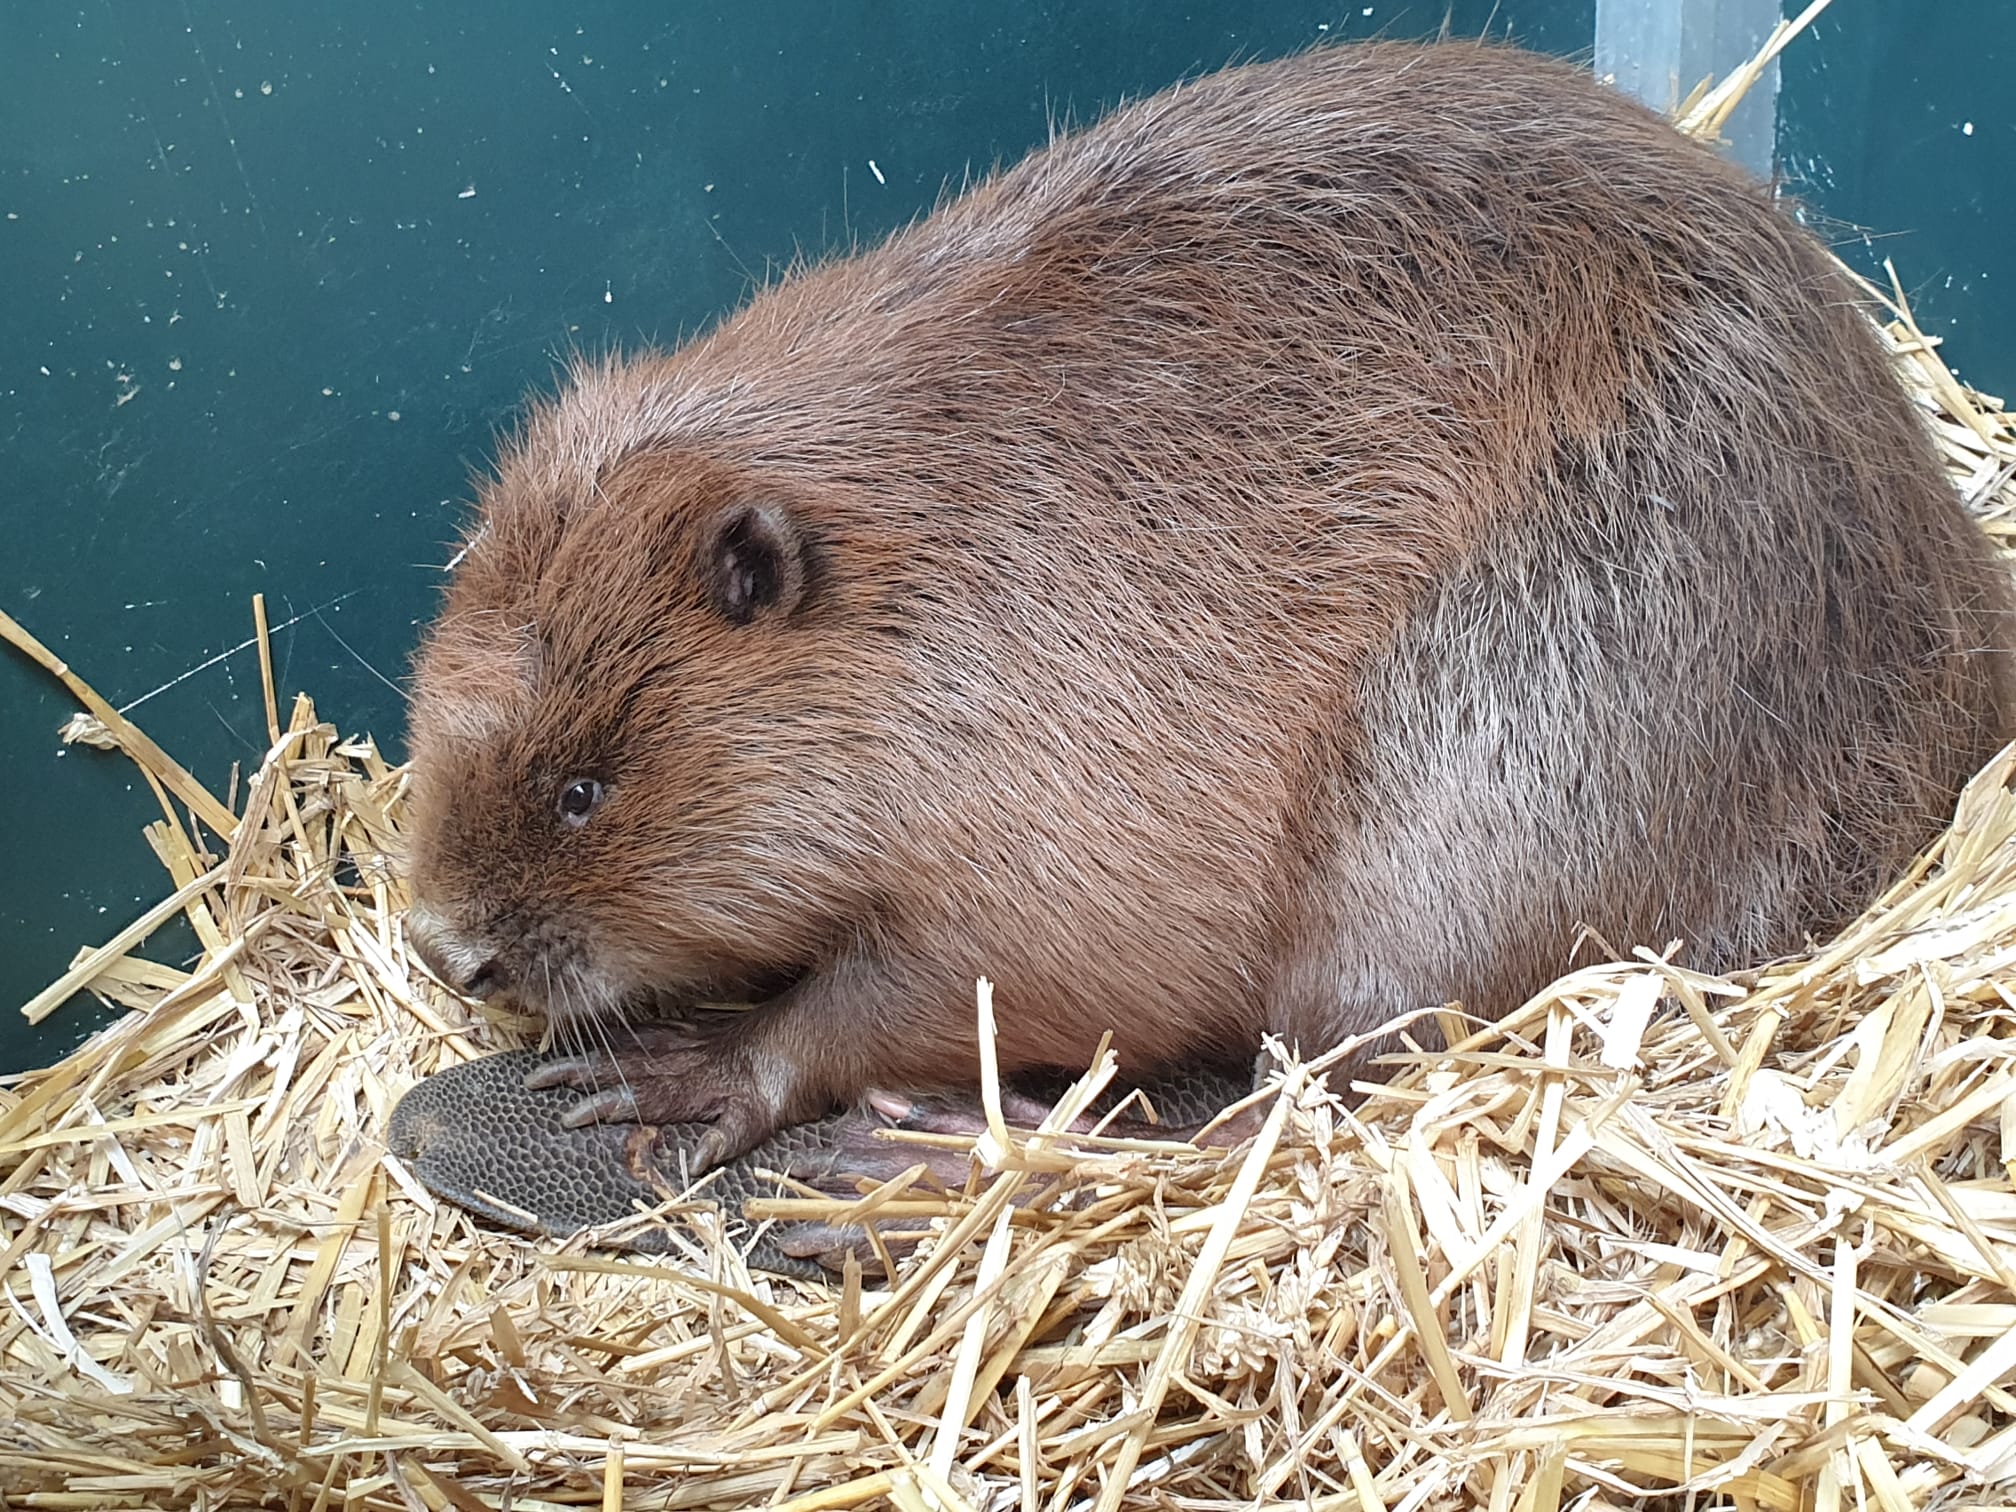 bever Ronnie in Wildopvang Zuid-Holland Delft